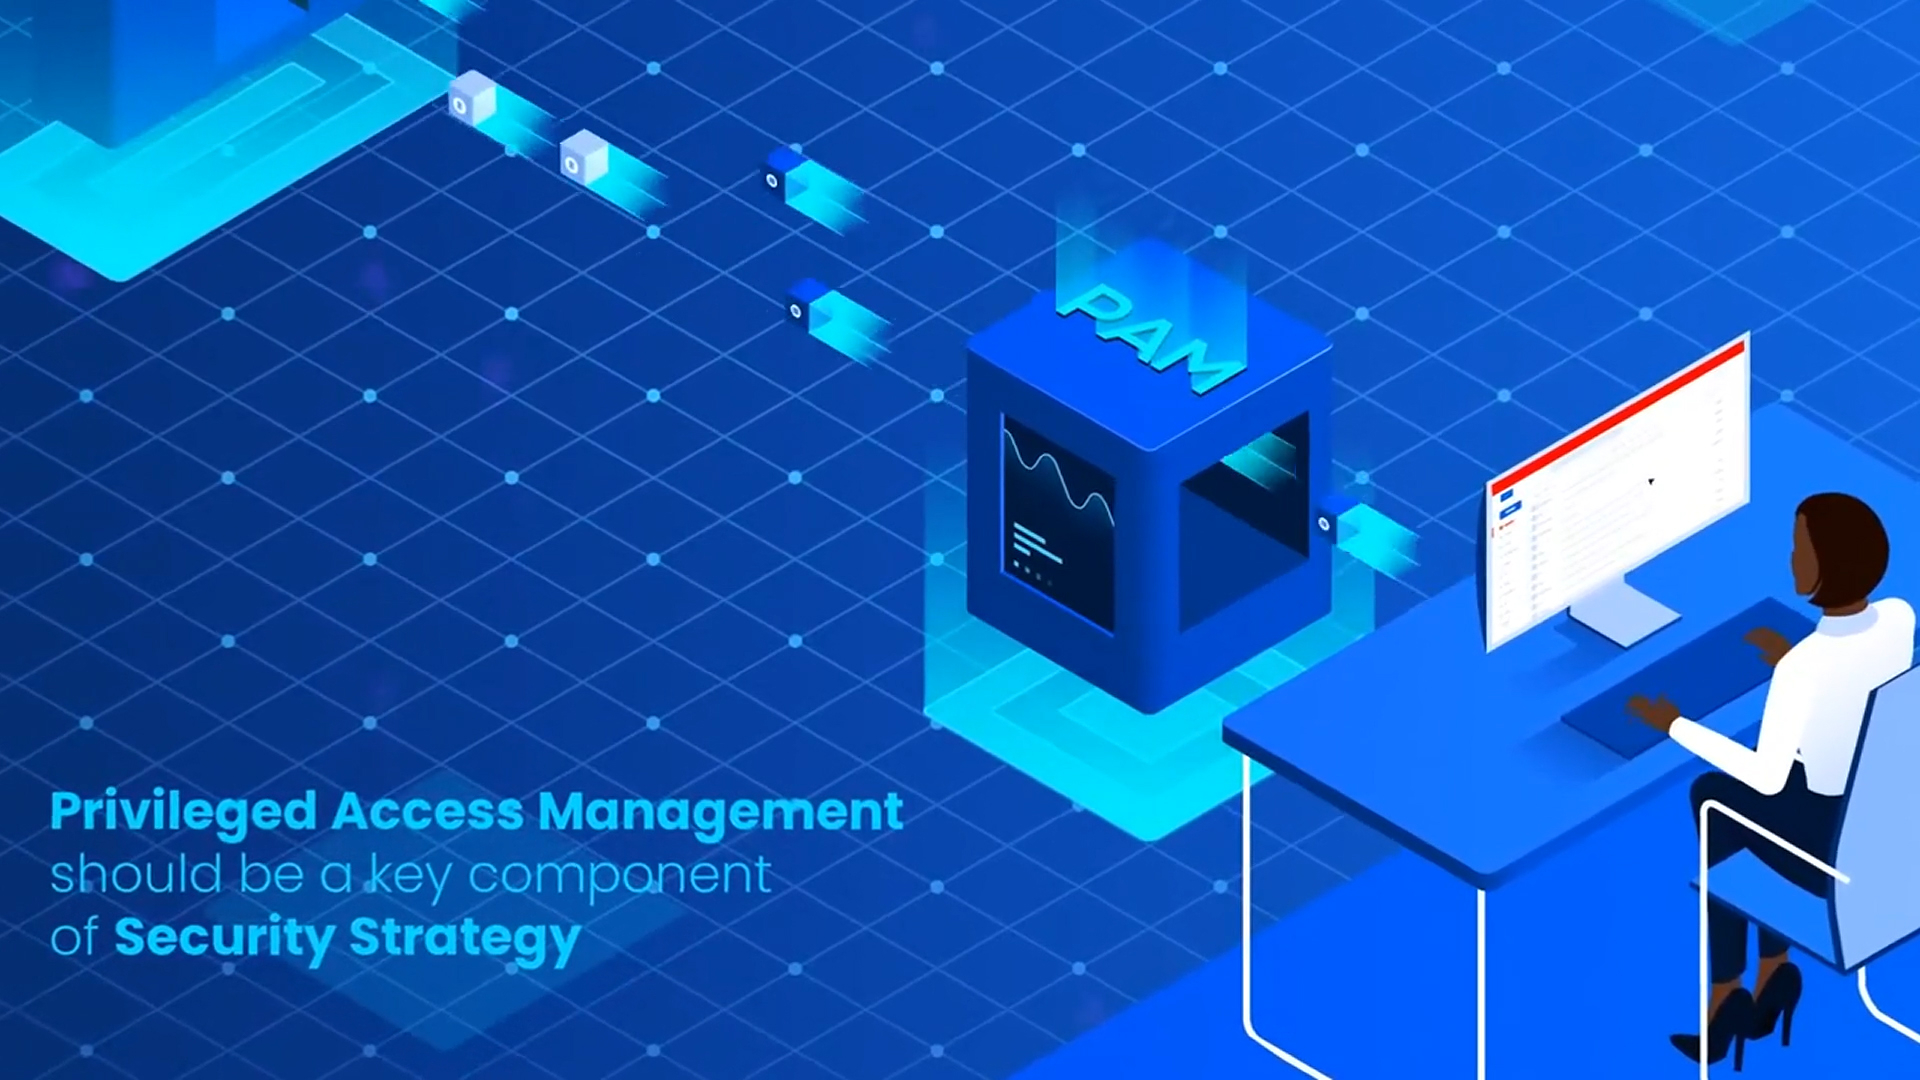 Discover the multi-faceted capabilities of RevBits Privileged Access Management. Improve asset and access security while reducing vendor costs.